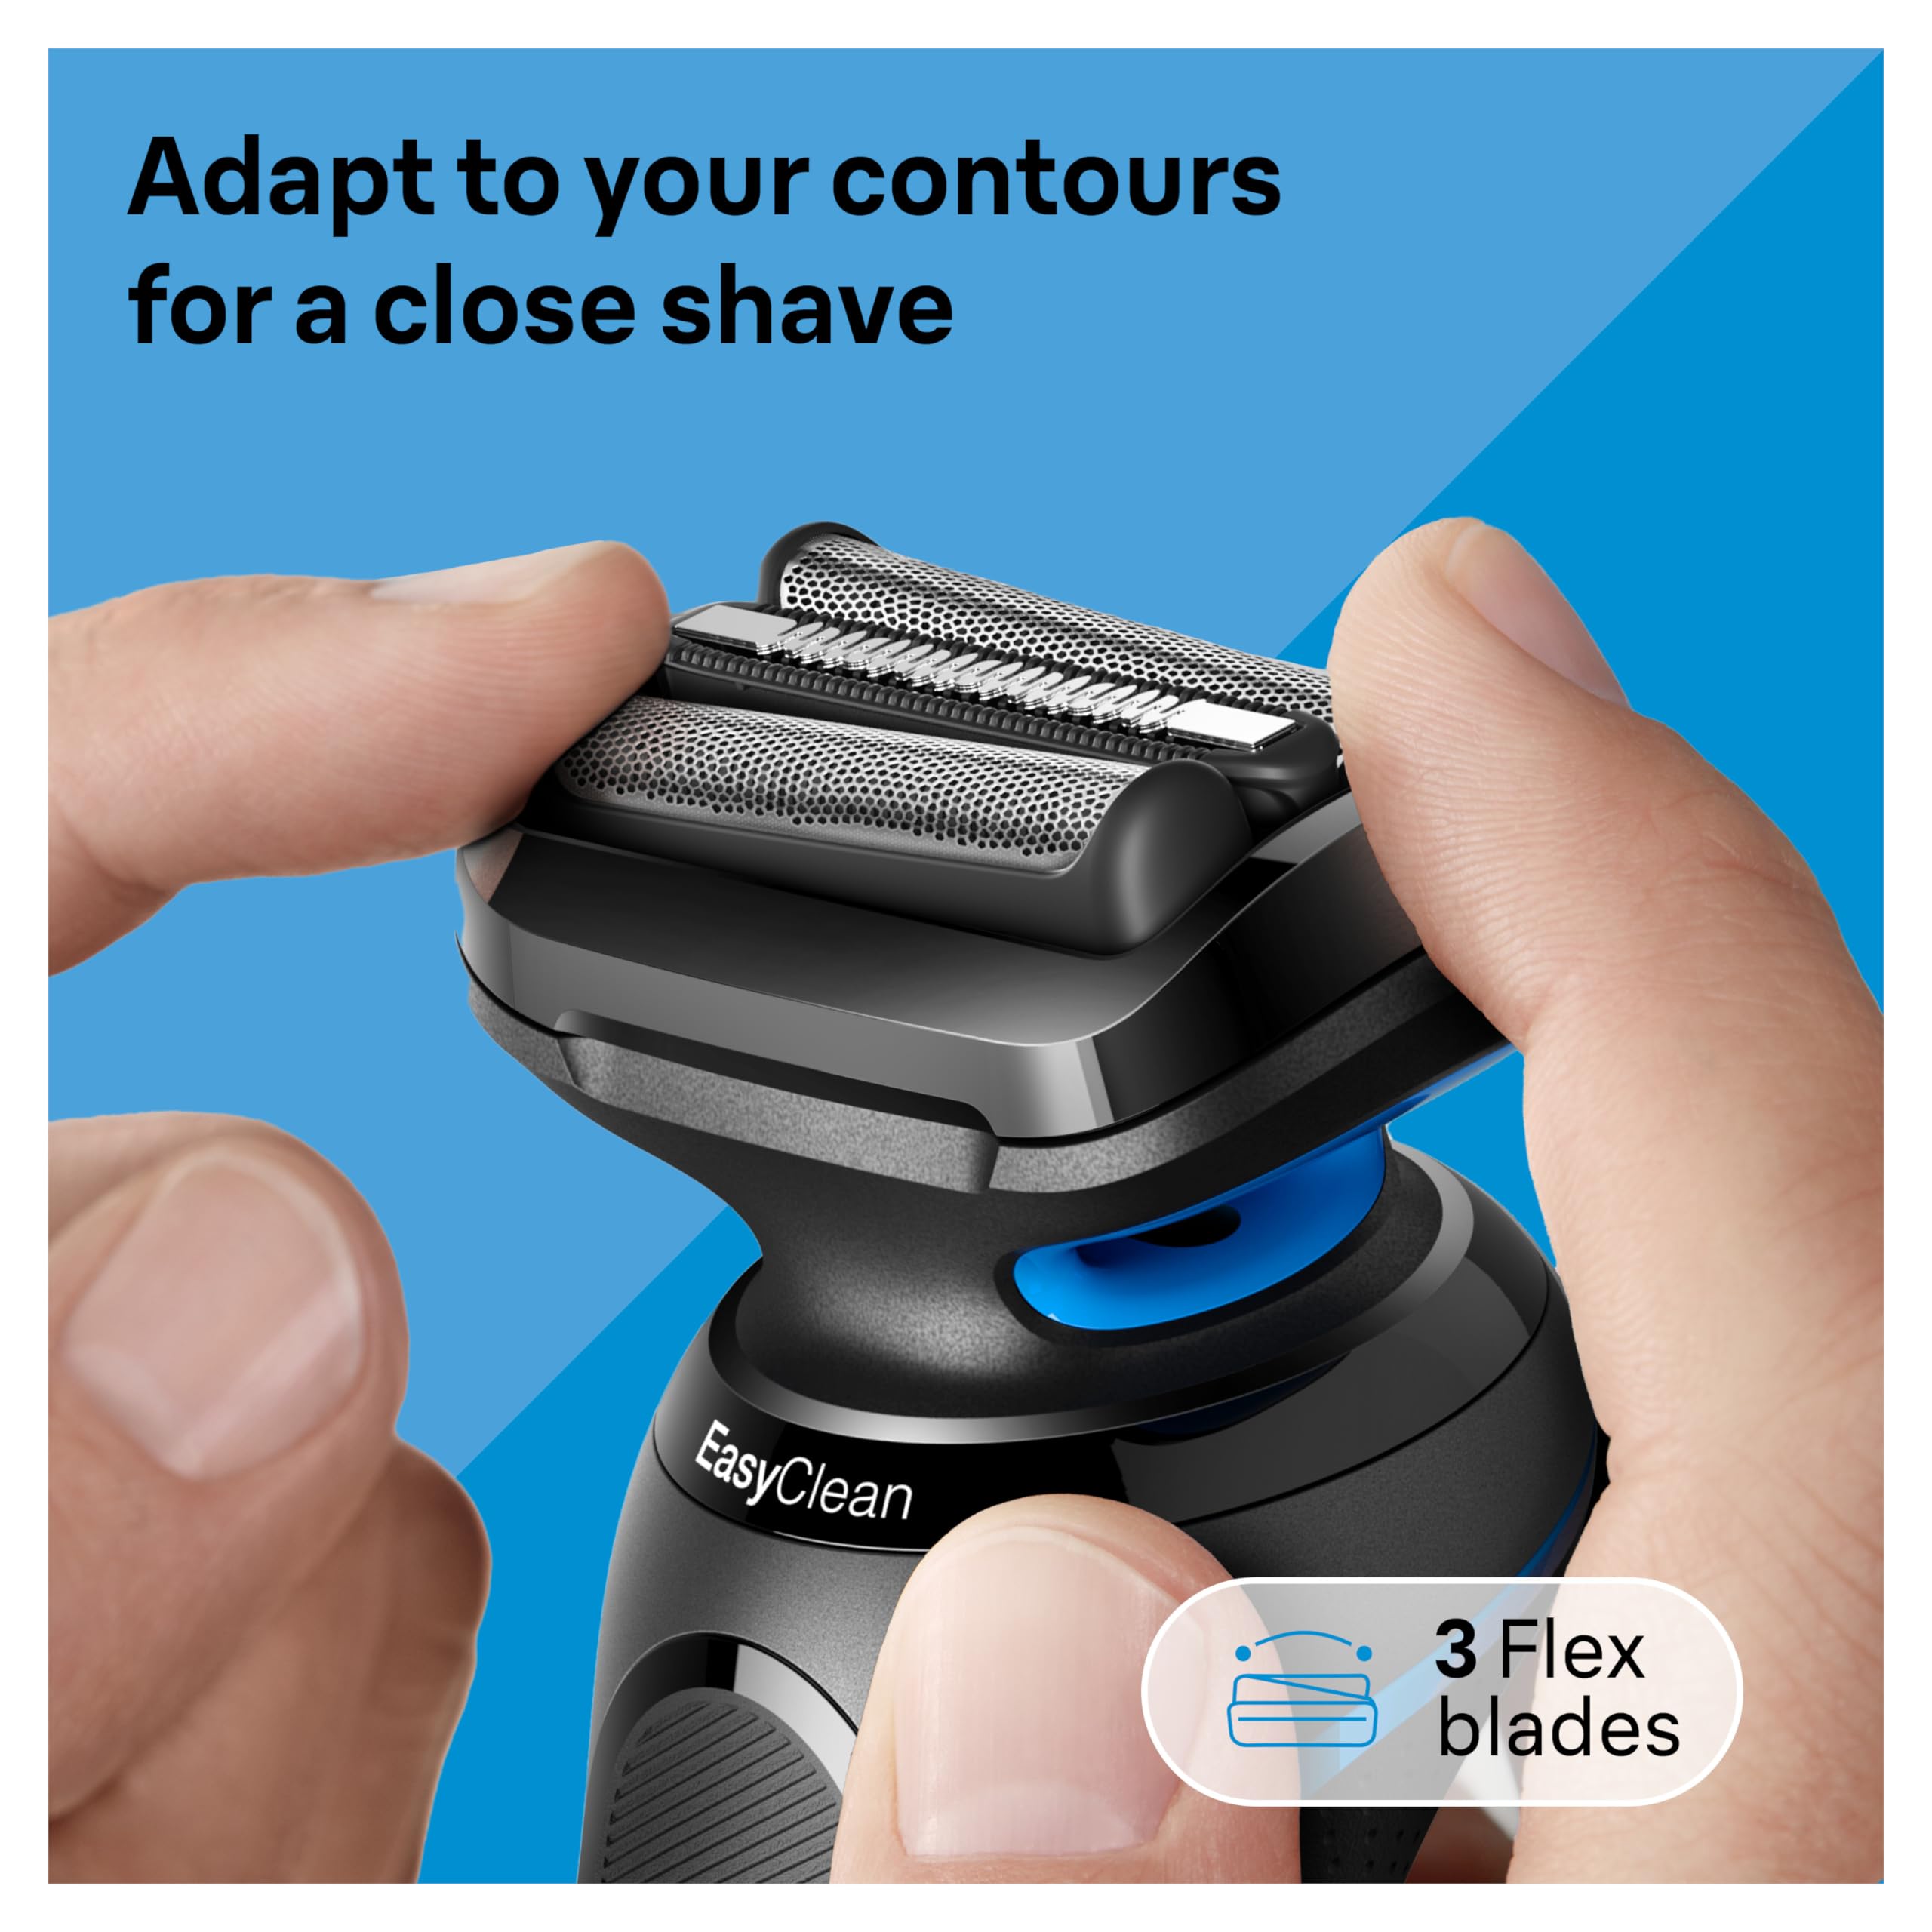 Braun Electric Shaver for Men, Series 5 5150cs, Wet & Dry Shave, Turbo Shaving Mode, Foil Shaver, with Beard Trimmer, Body Groomer and Charging Stand, Blue